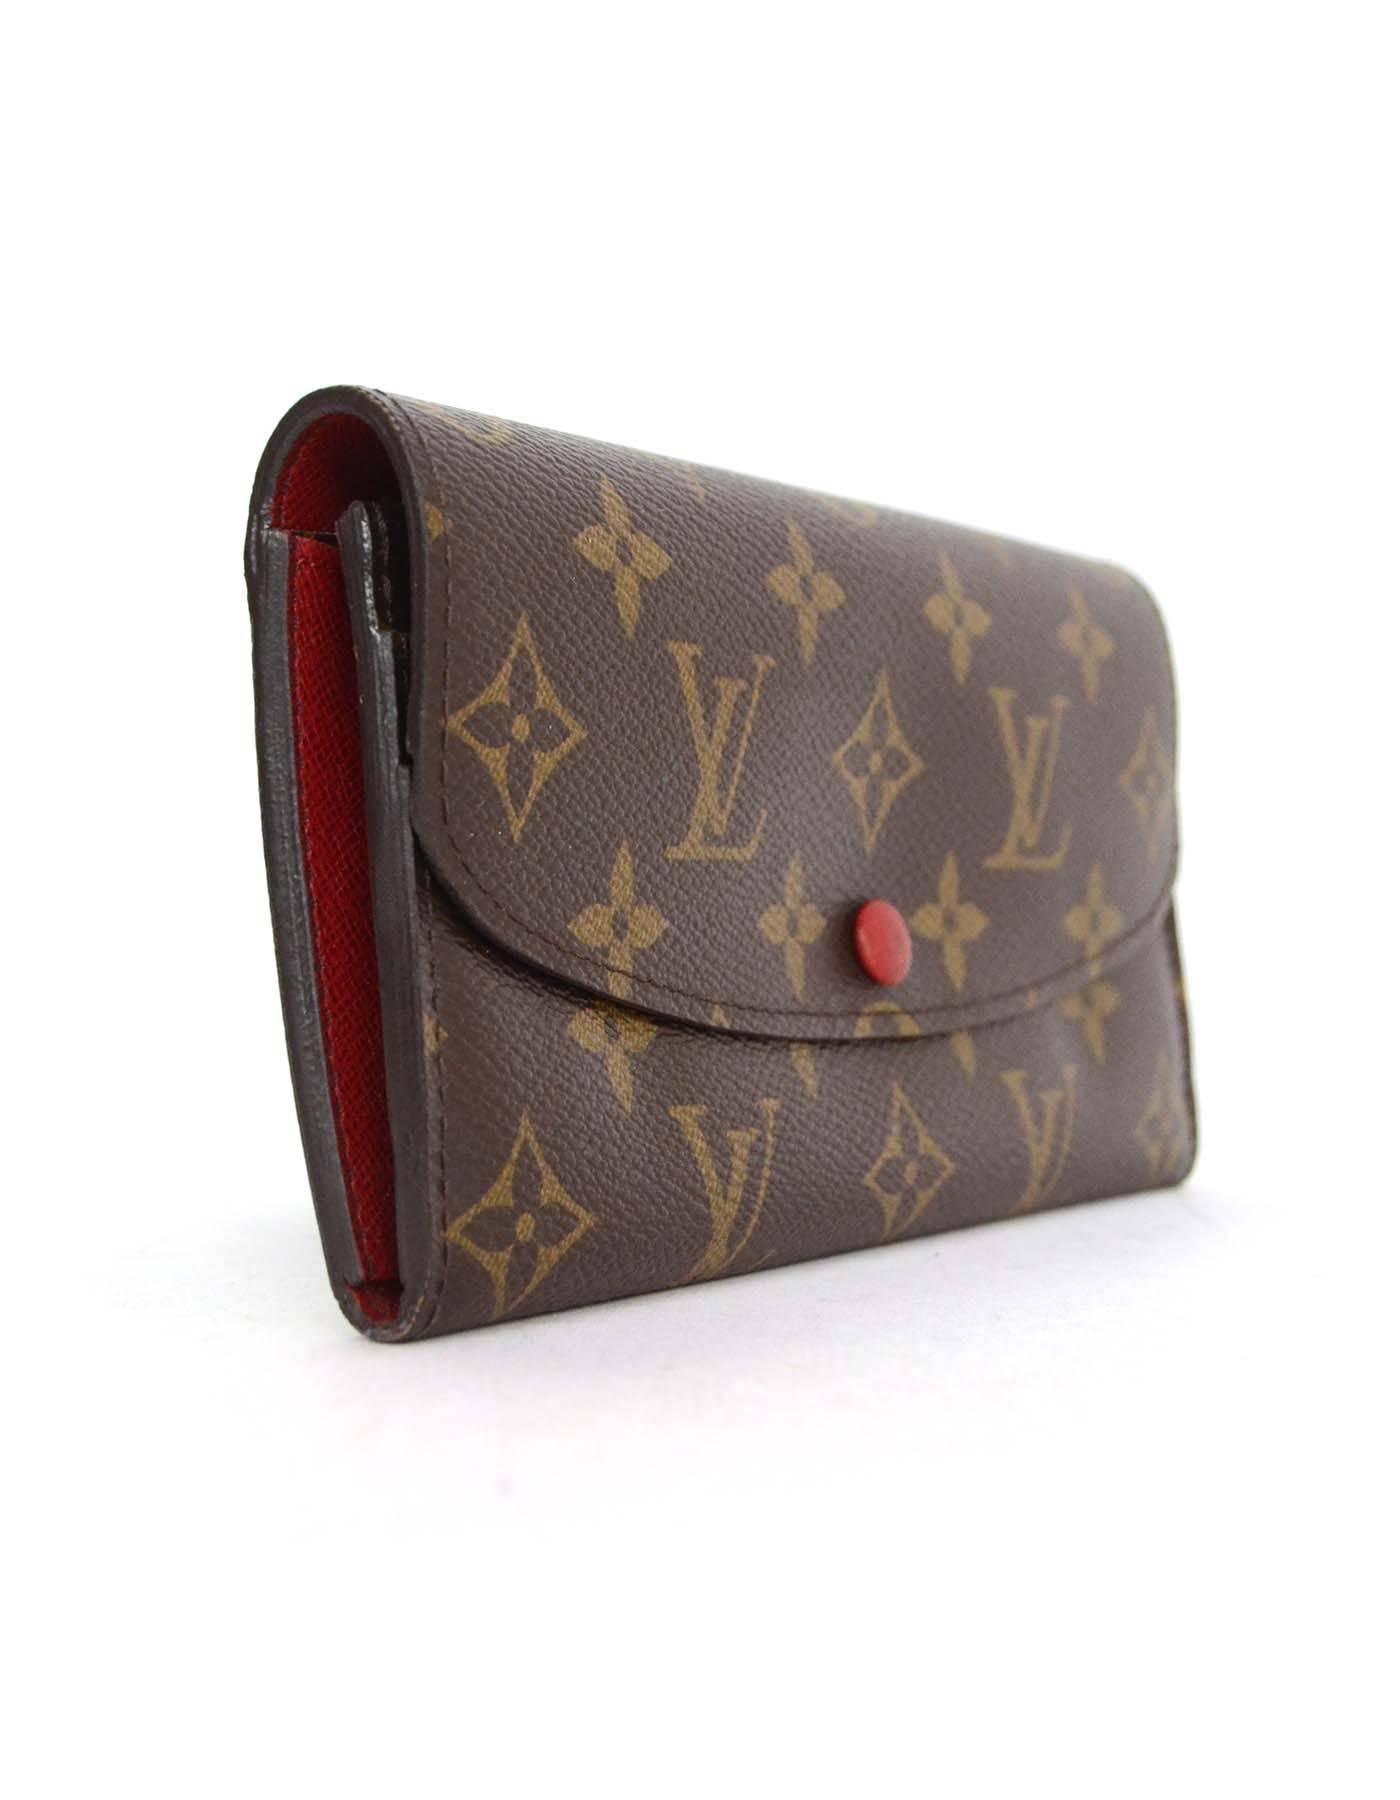 Louis Vuitton Brown and Red Monogram Emilie Wallet

Made In: Spain
Year of Production: 2013
Color: Brown and red
Hardware: Goldtone
Materials: Coated canvas
Lining: Coated canvas
Closure/Opening: Flap top with snap closure
Exterior Pockets: